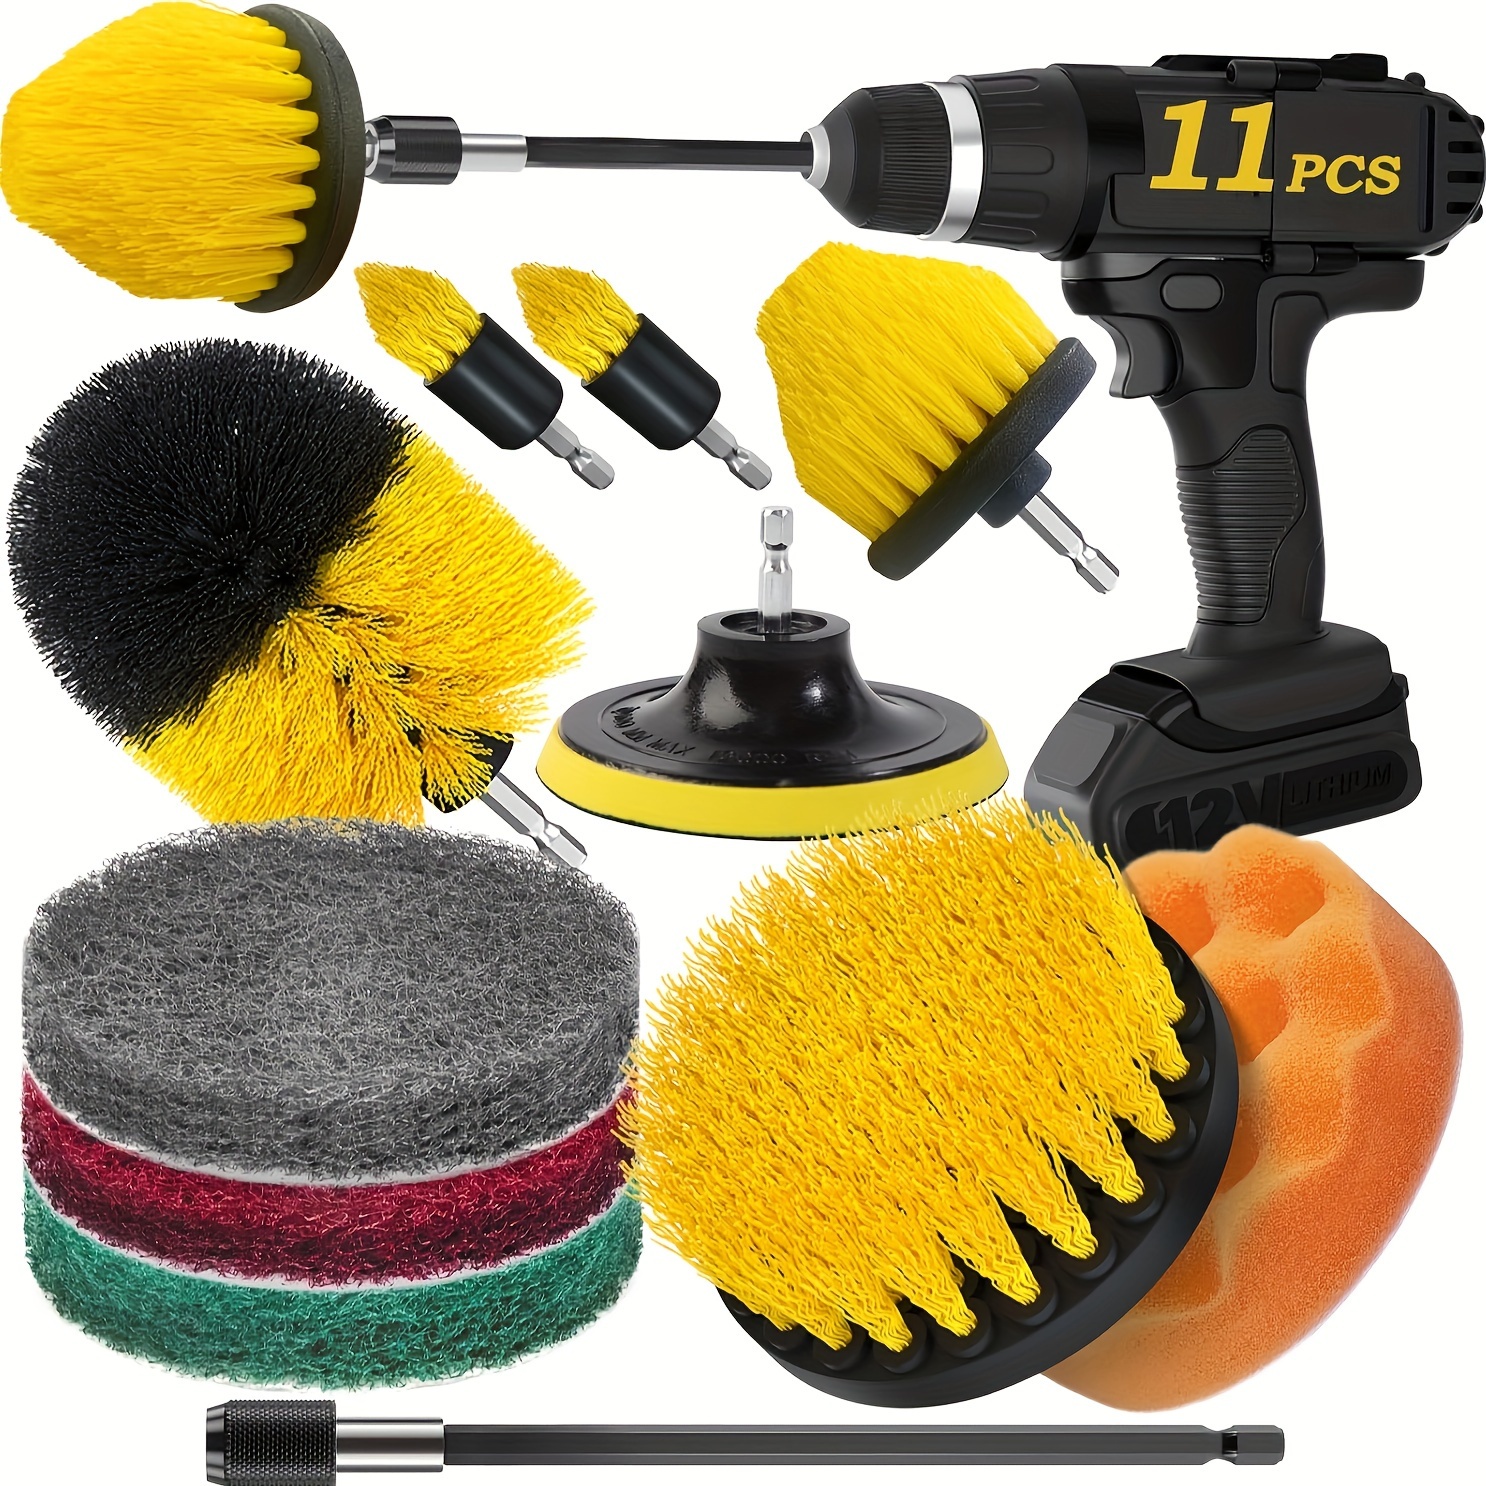 

Multi-piece Drill Brush Attachment Set For Power Scrubbing - Ideal For Bathroom, Kitchen, Tile & Grout Cleaning - Includes 3/5/11 Pieces Brush Cleaning Tool Scrub Brush For Cleaning